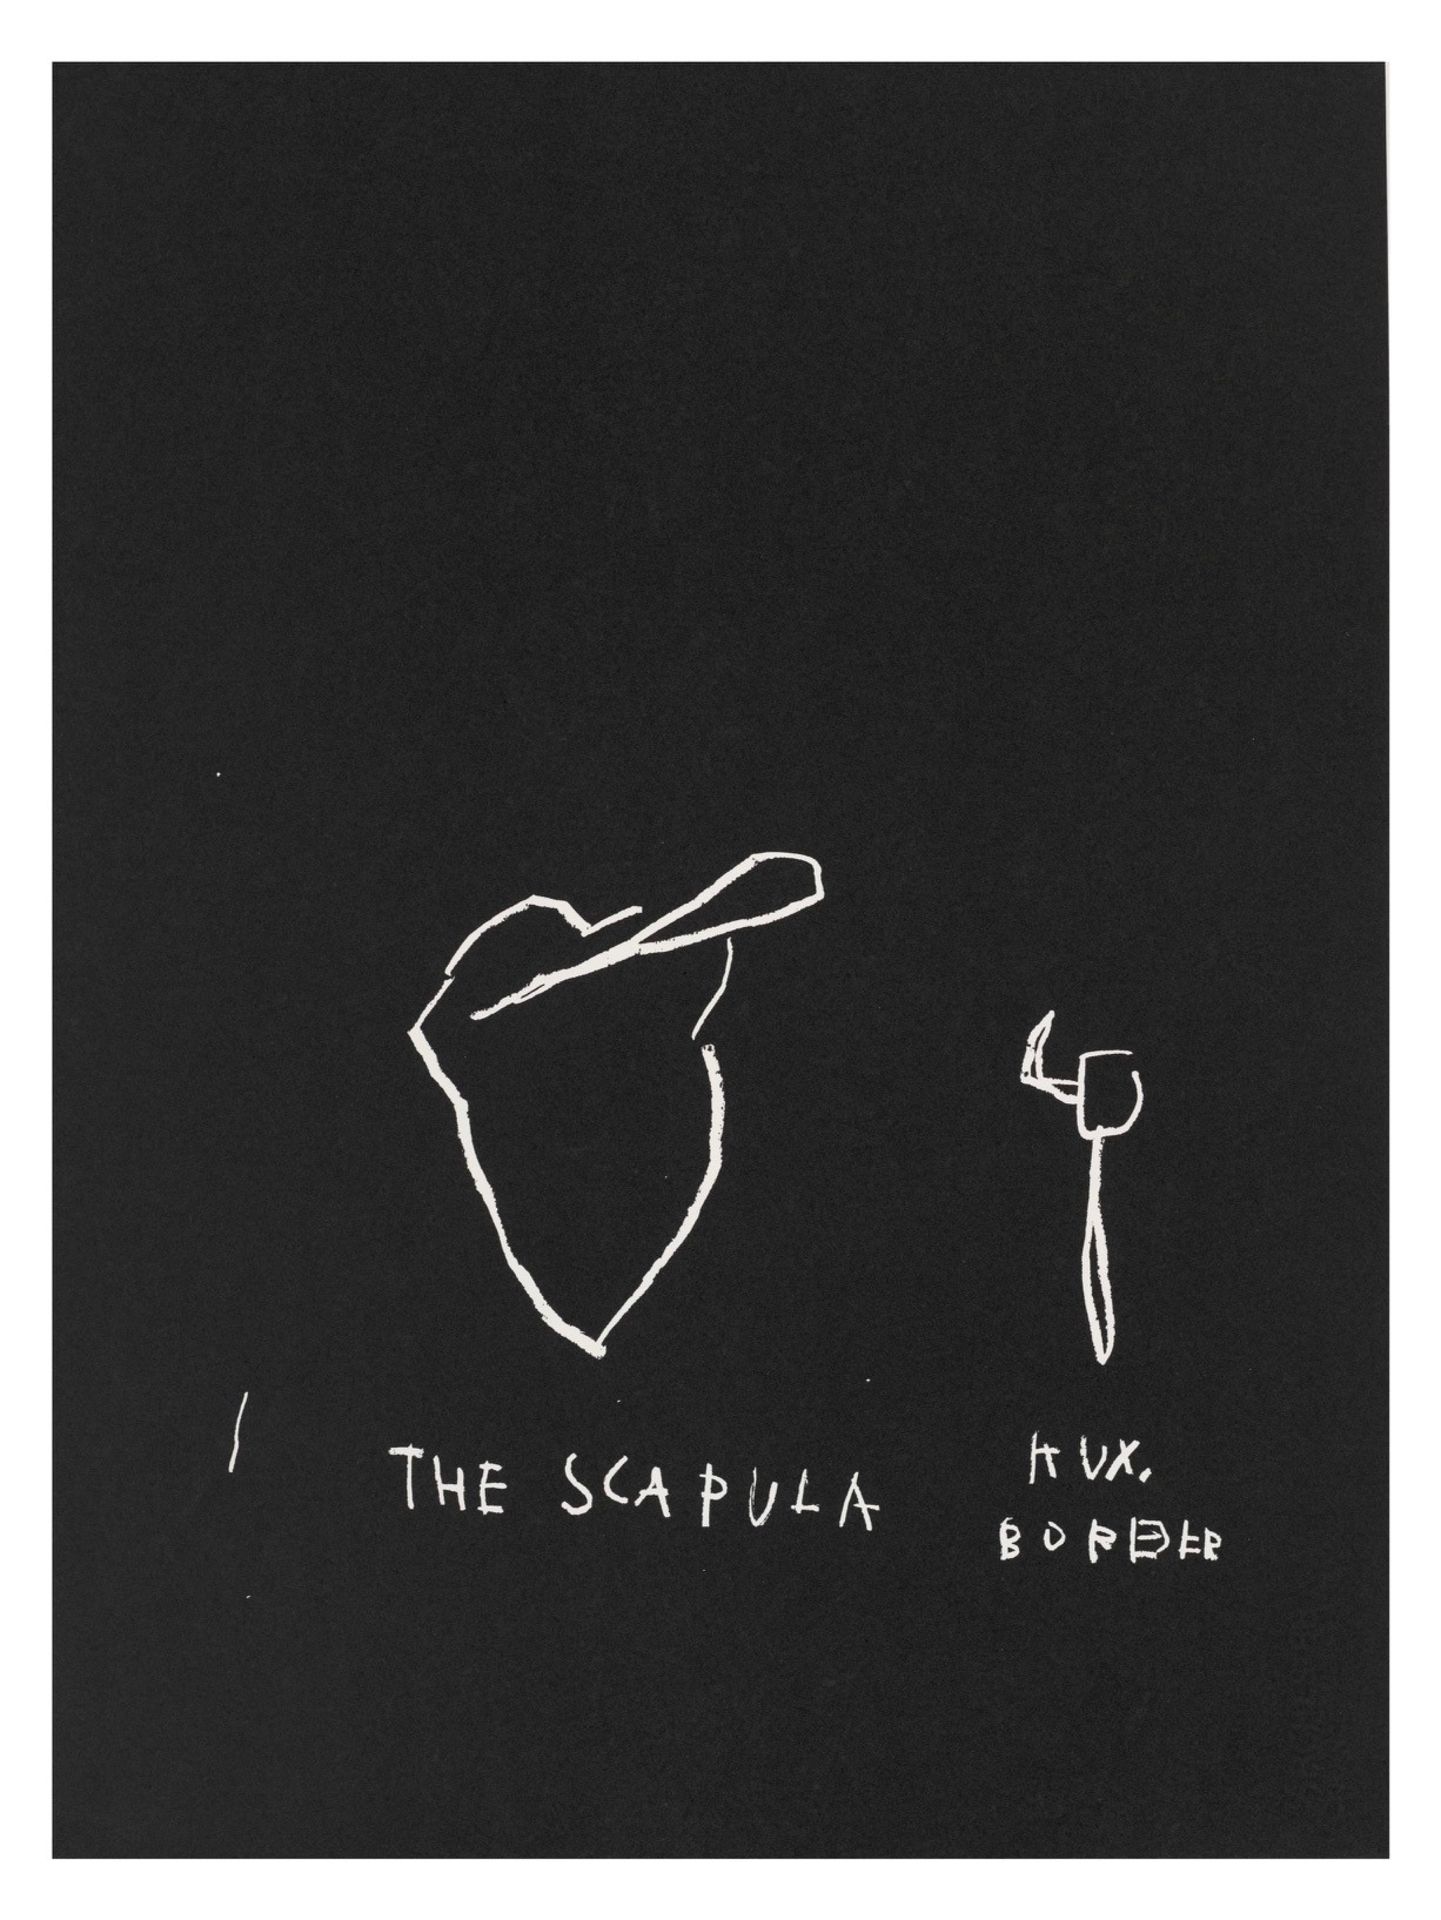 AFTER JEAN-MICHEL BASQUIAT (1960-1988) The Scapula, from Anatomy